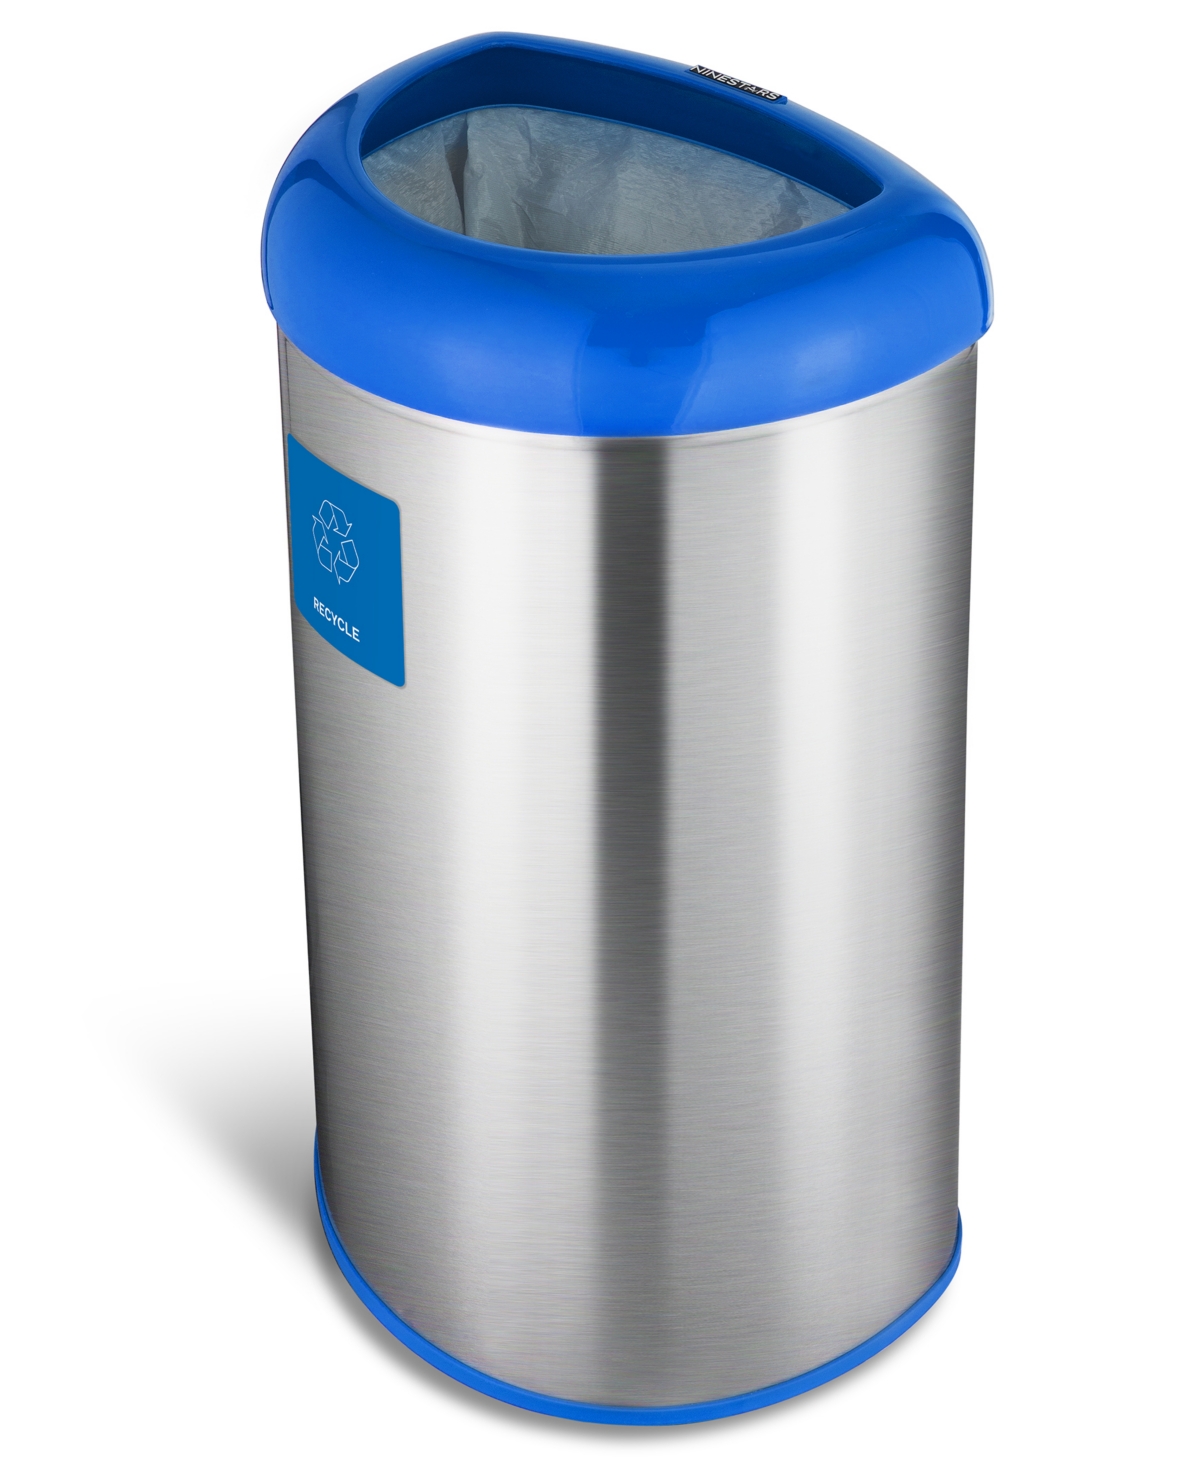 13.2 Gallon Open Top Trash Can with Recycle Magnet - Blue